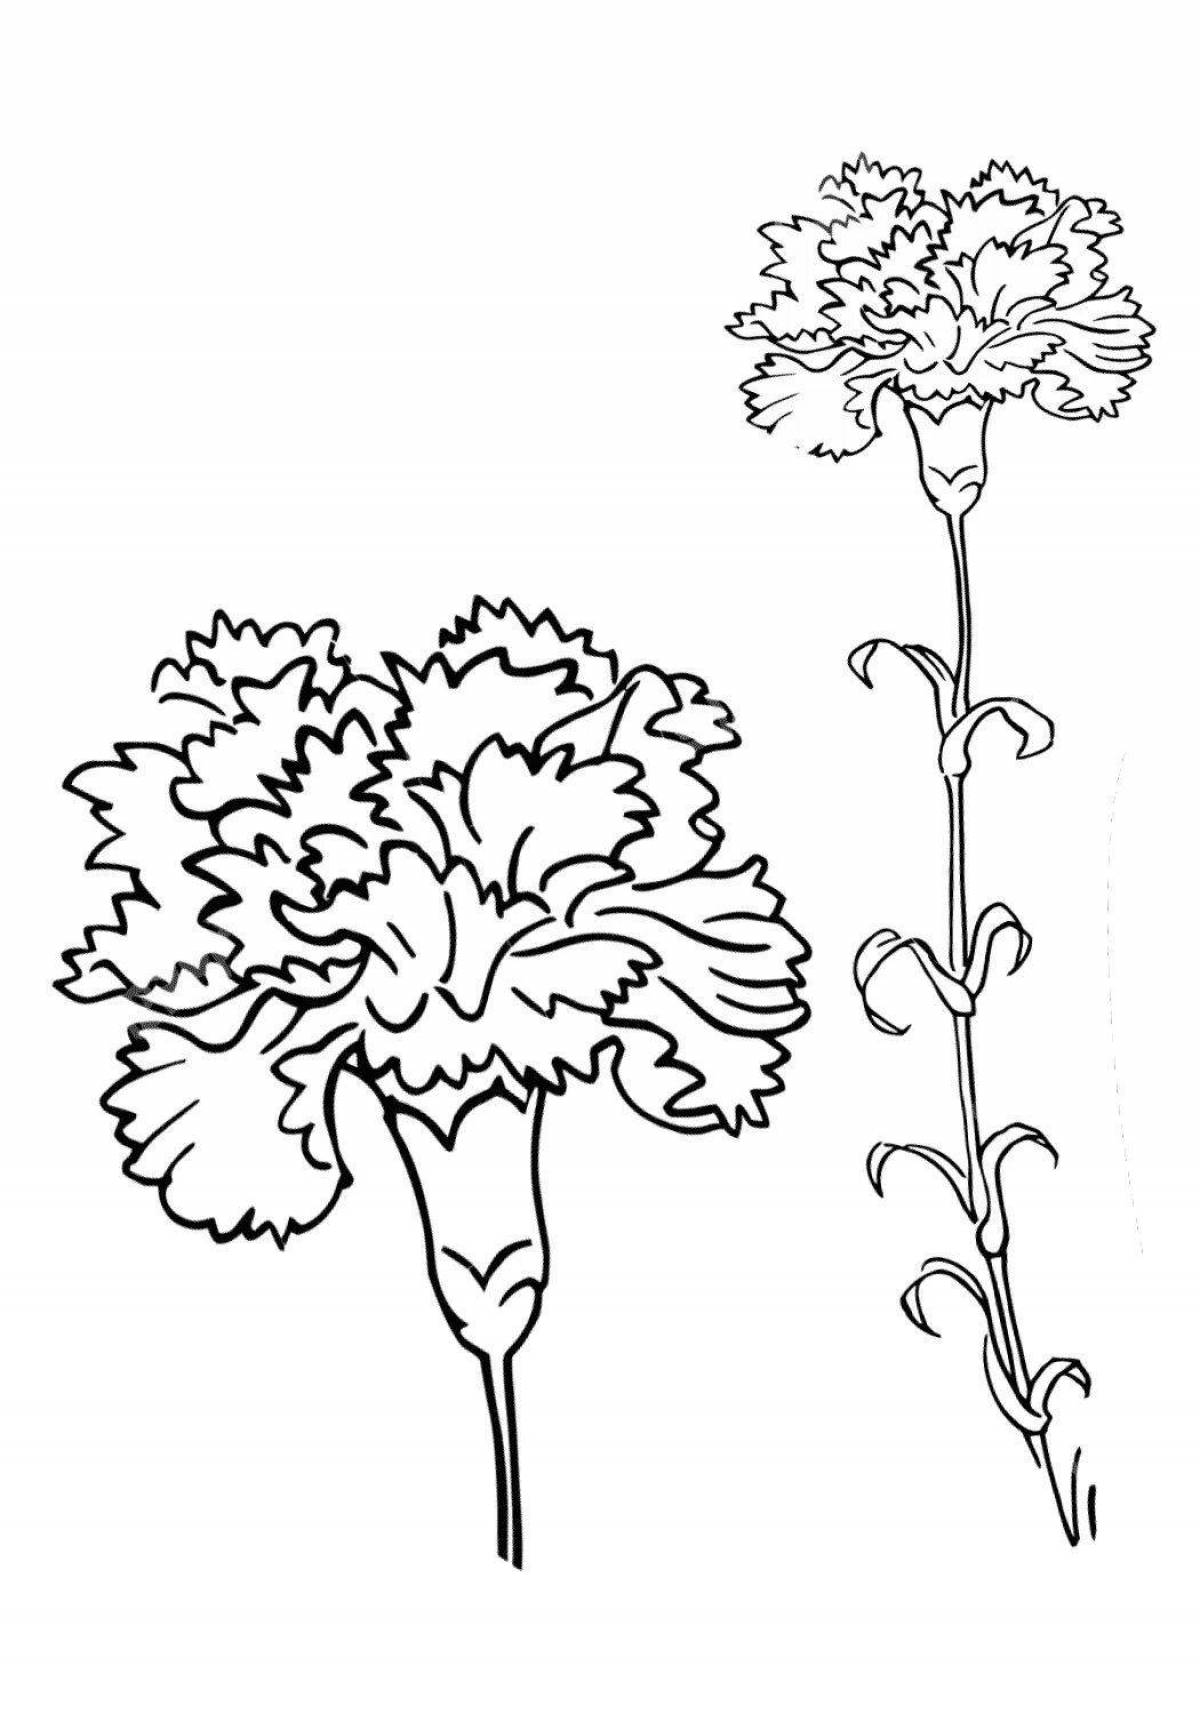 Coloring bright bouquet of carnations